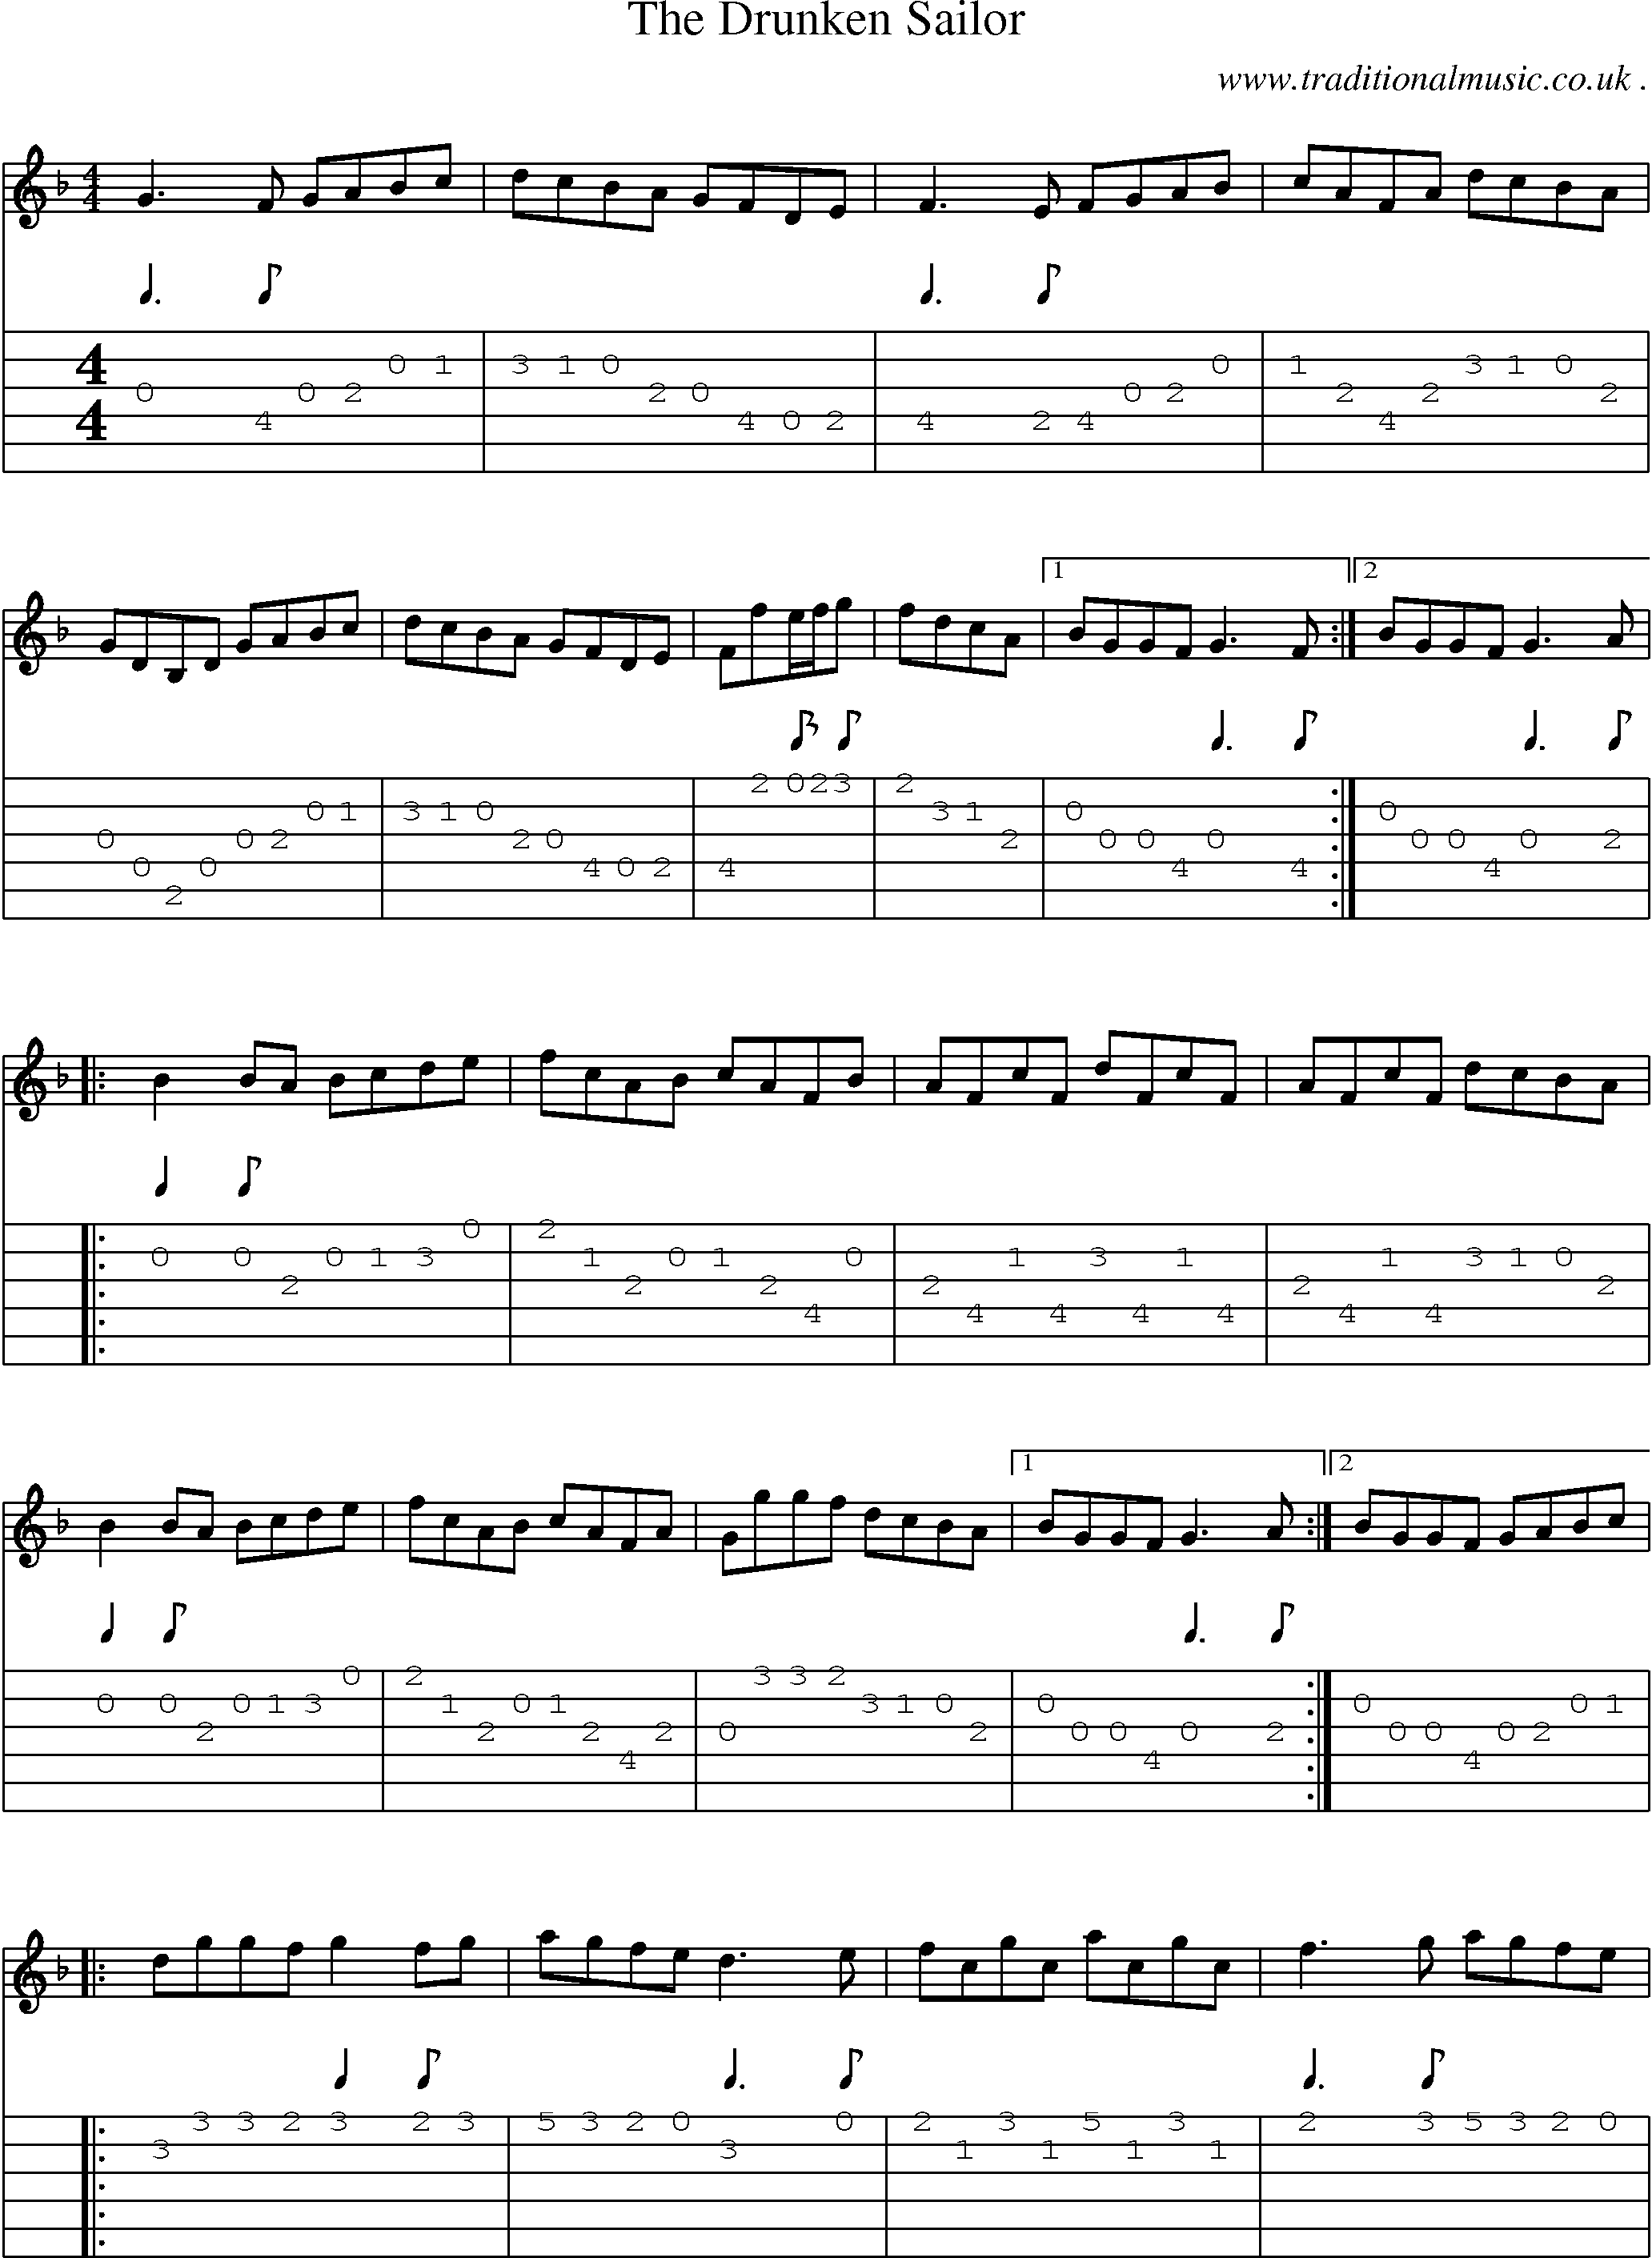 Sheet-Music and Guitar Tabs for The Drunken Sailor